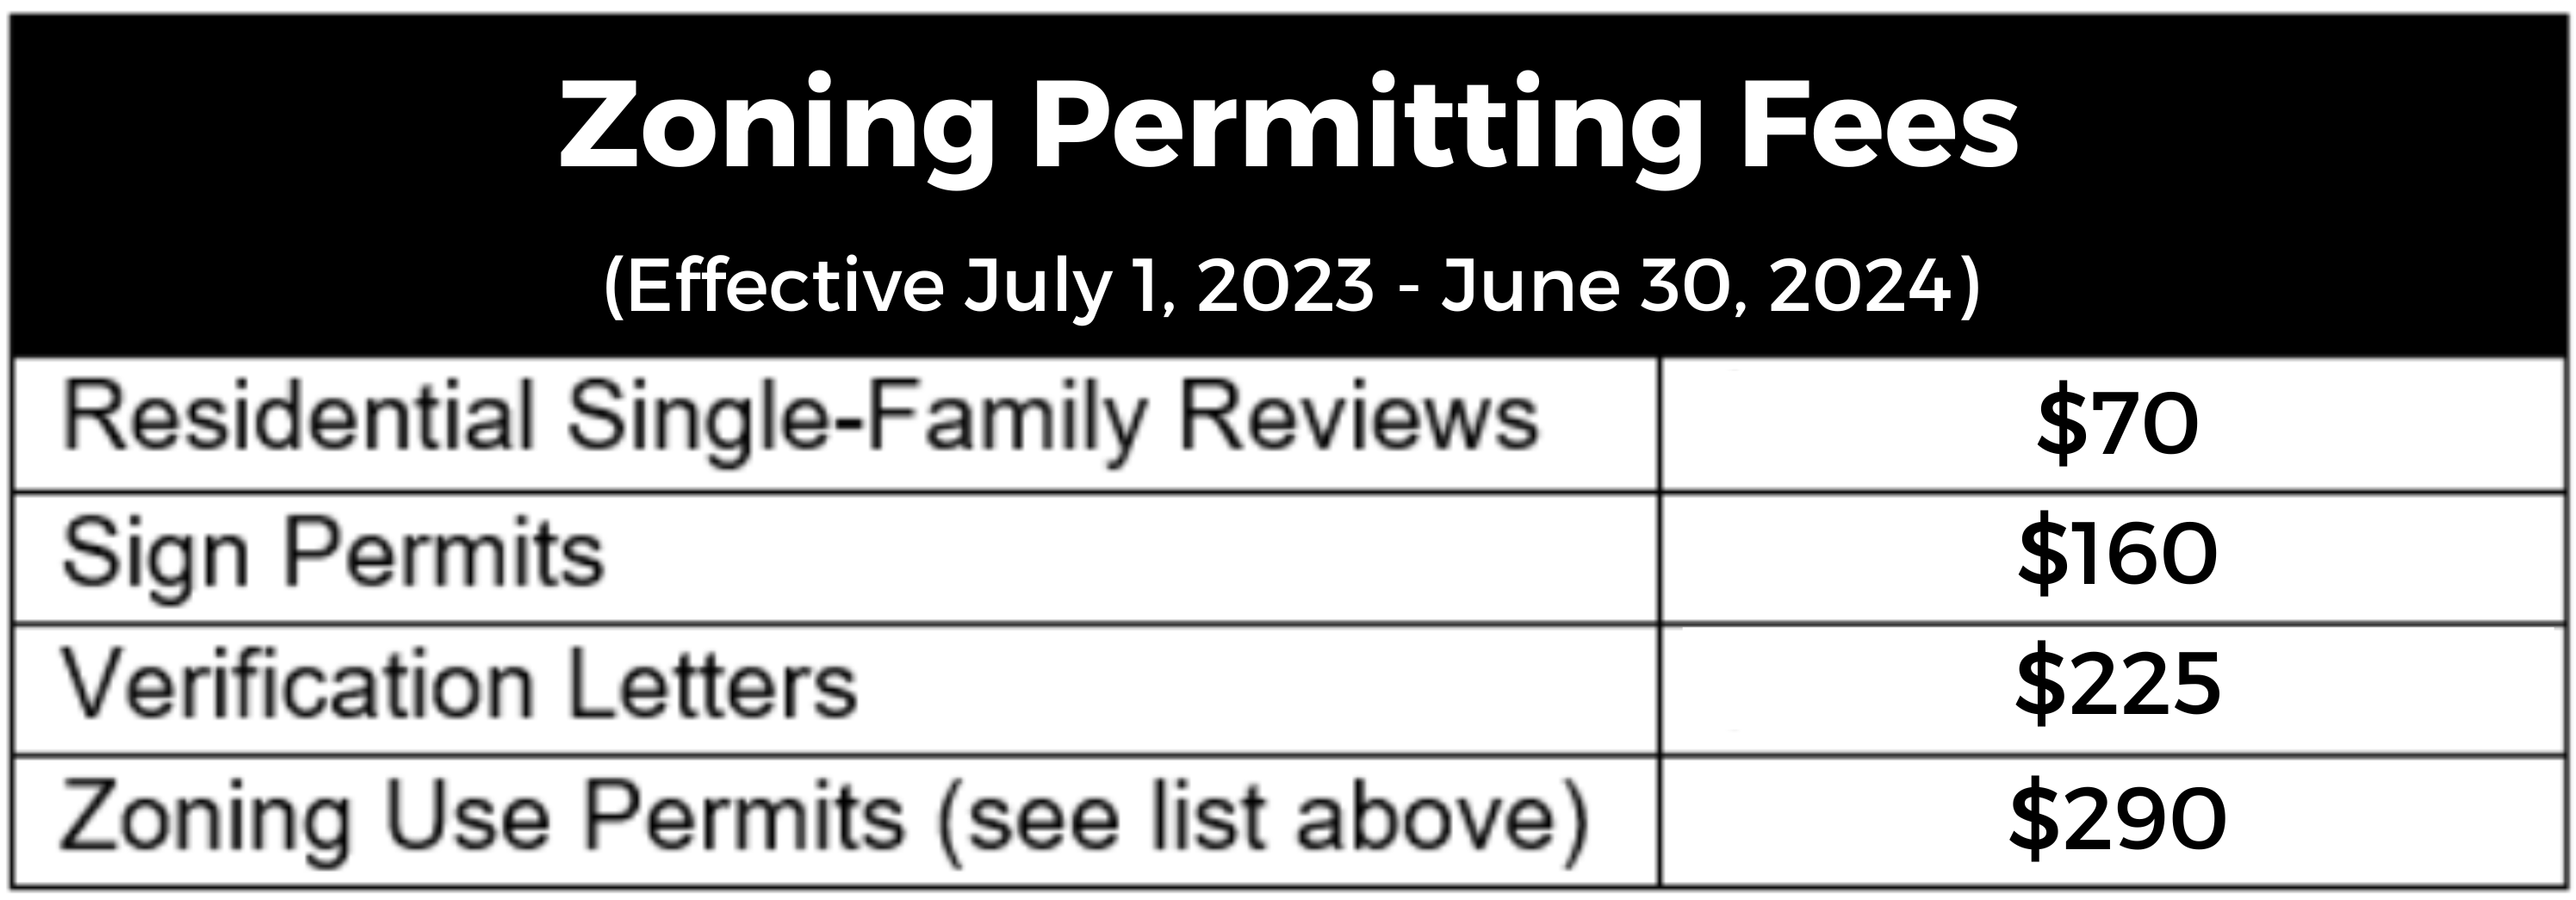 Image of Zoning Permitting Fees